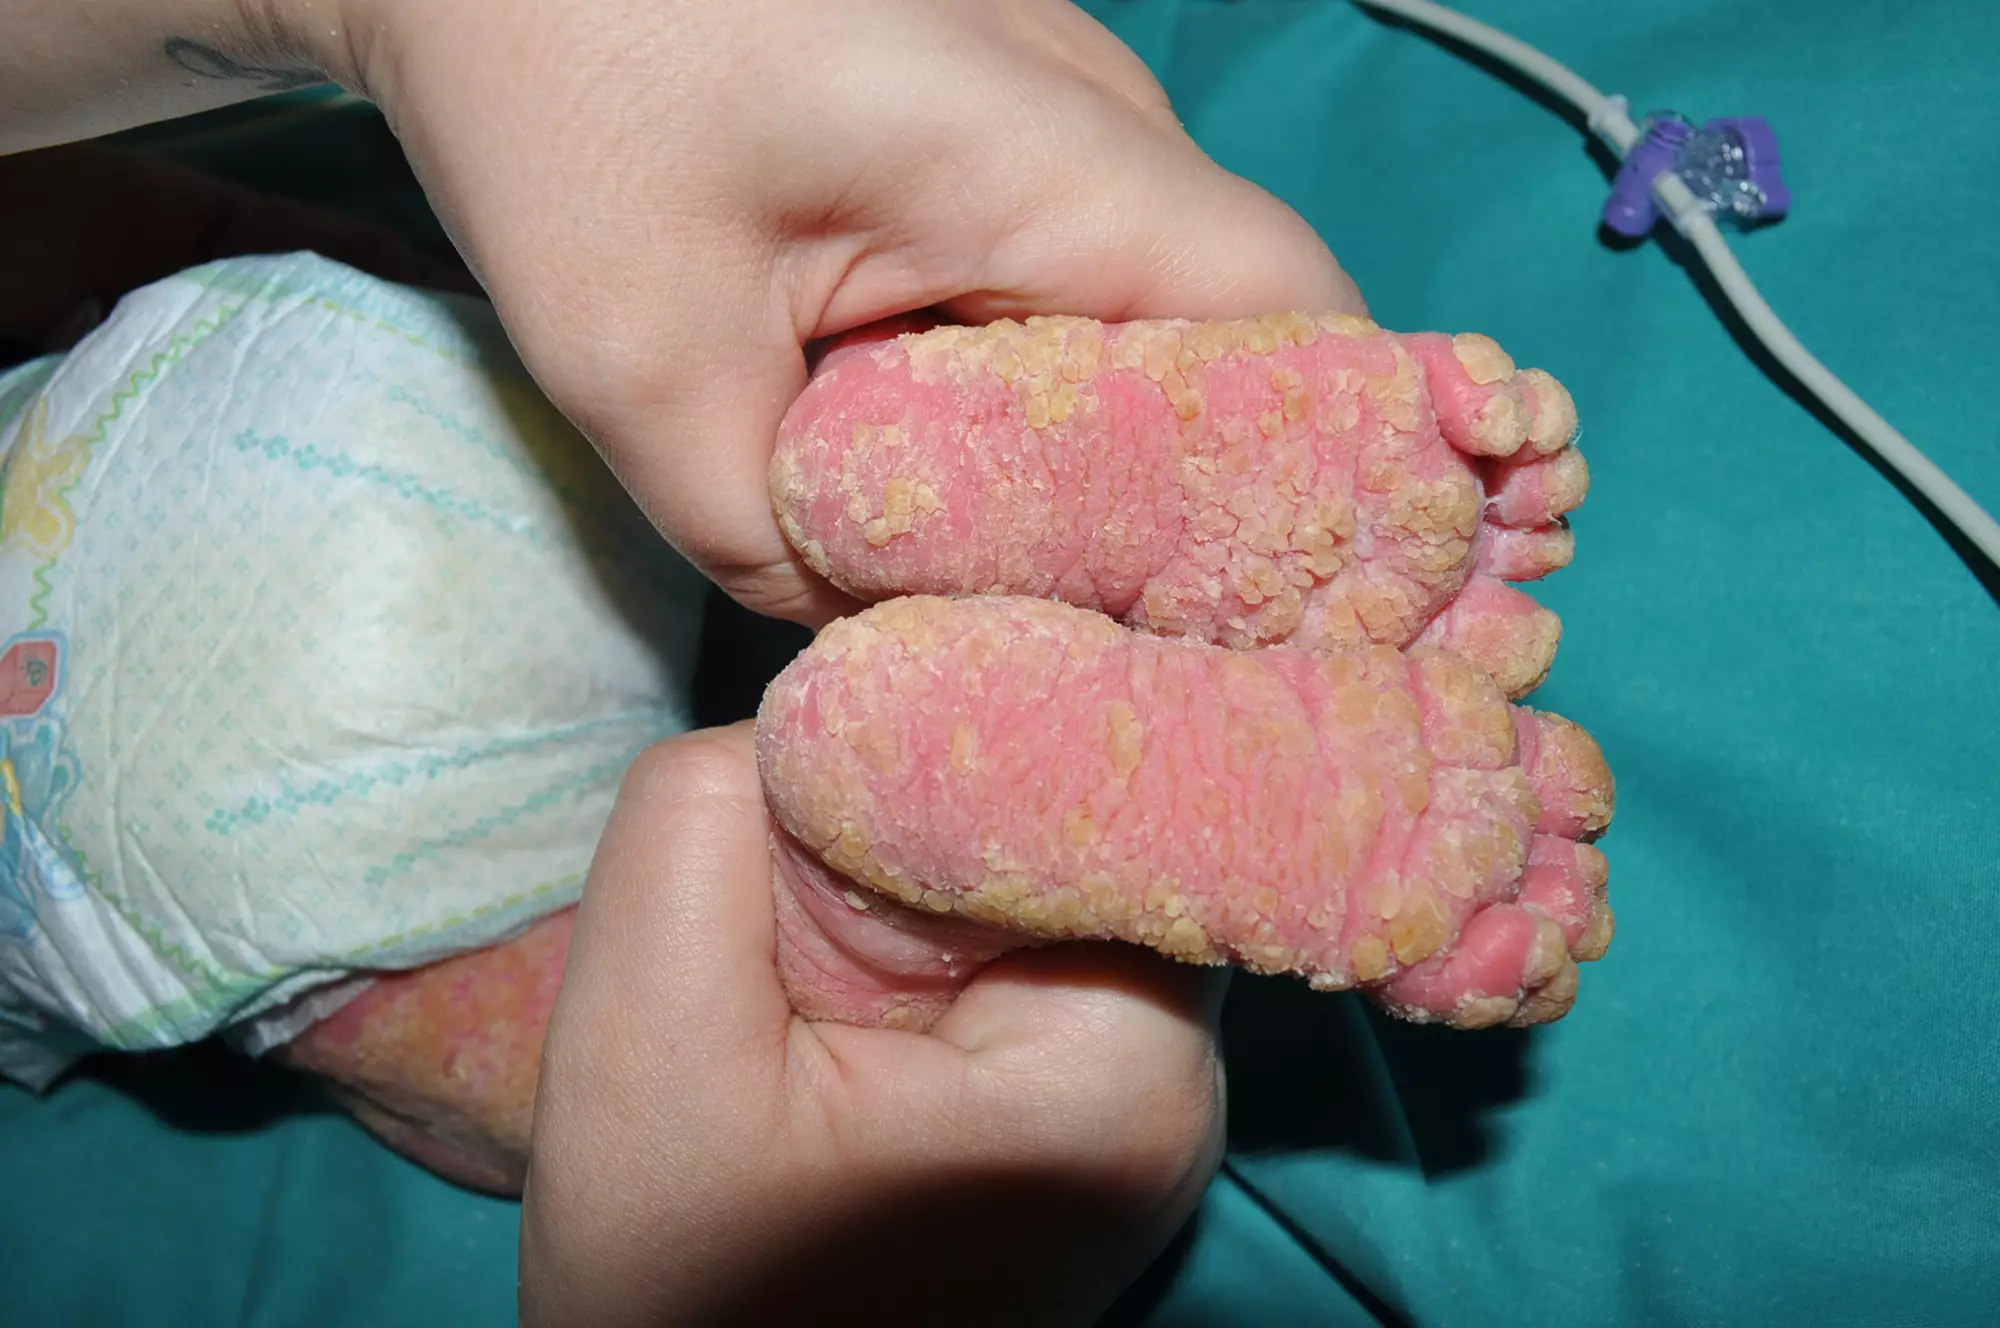 The baby's skin before treatment.